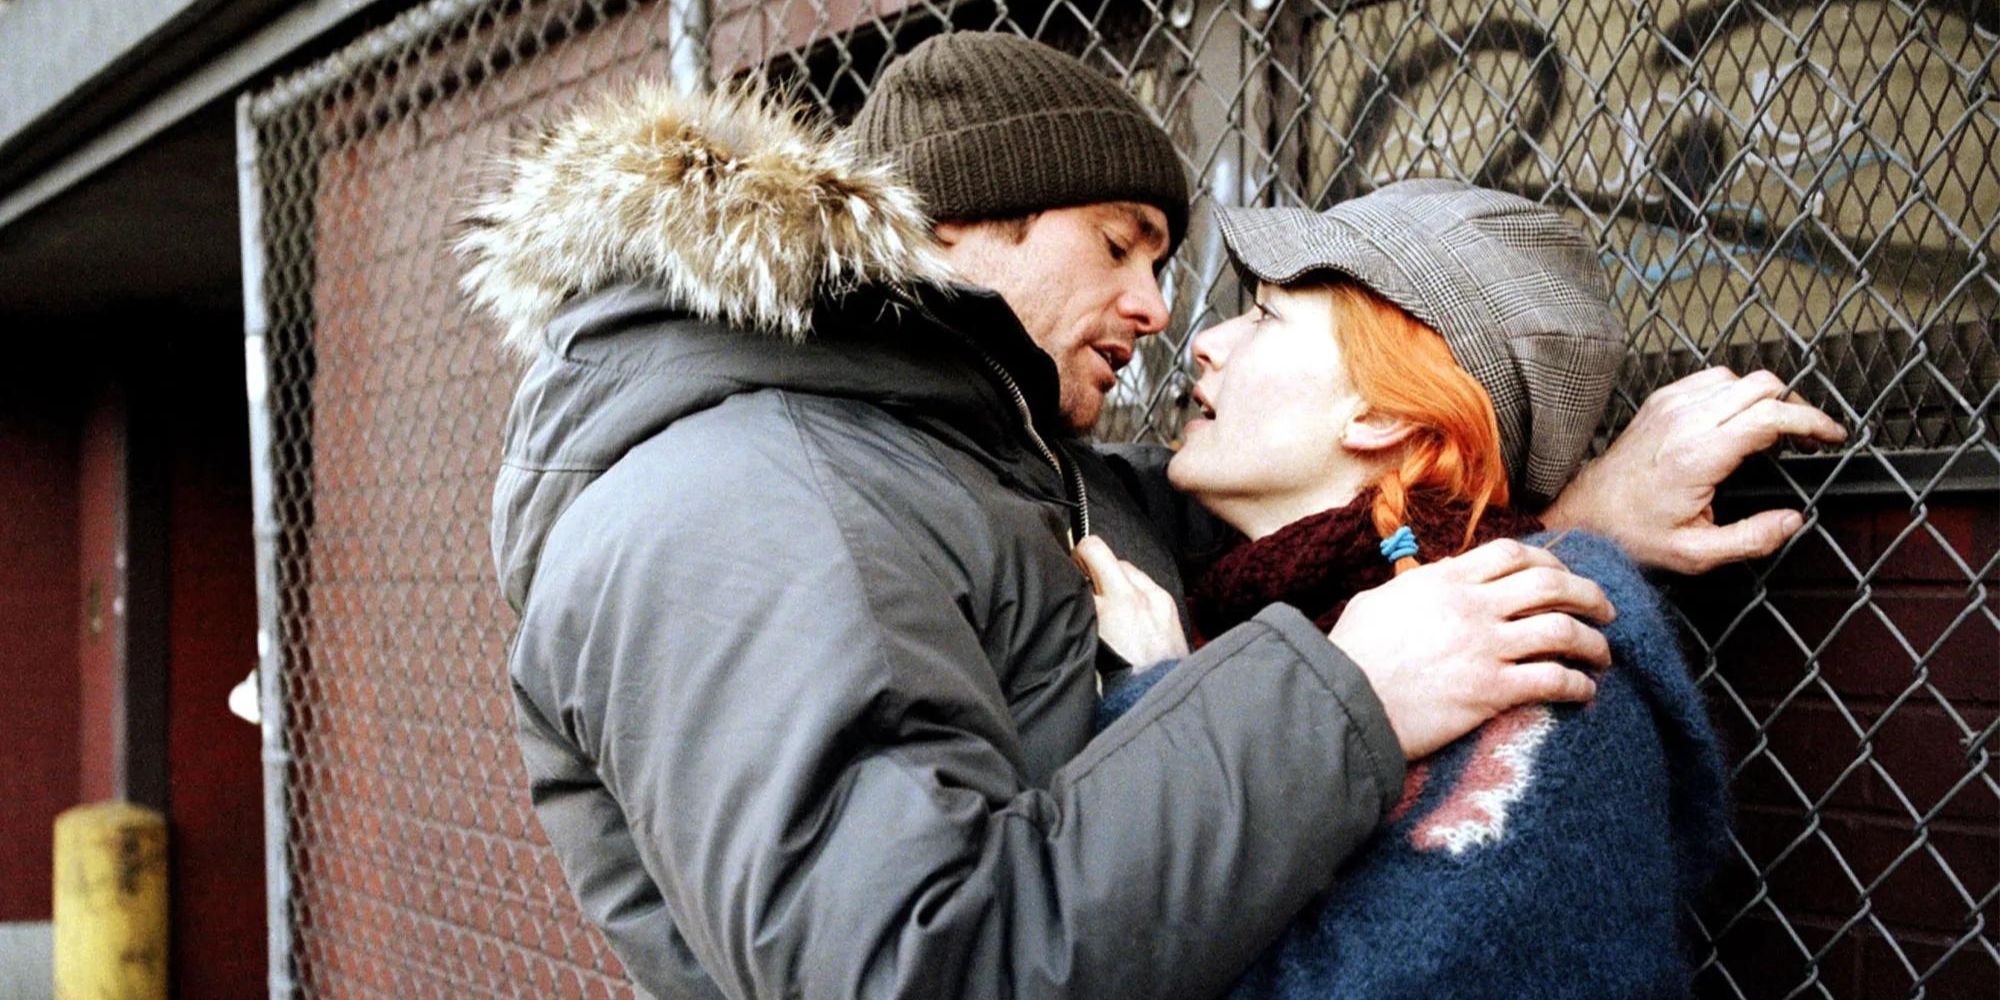 Jim Carrey and Kate Winslet embracing against a fence in Eternal Sunshine of the Spotless Mind (2004)